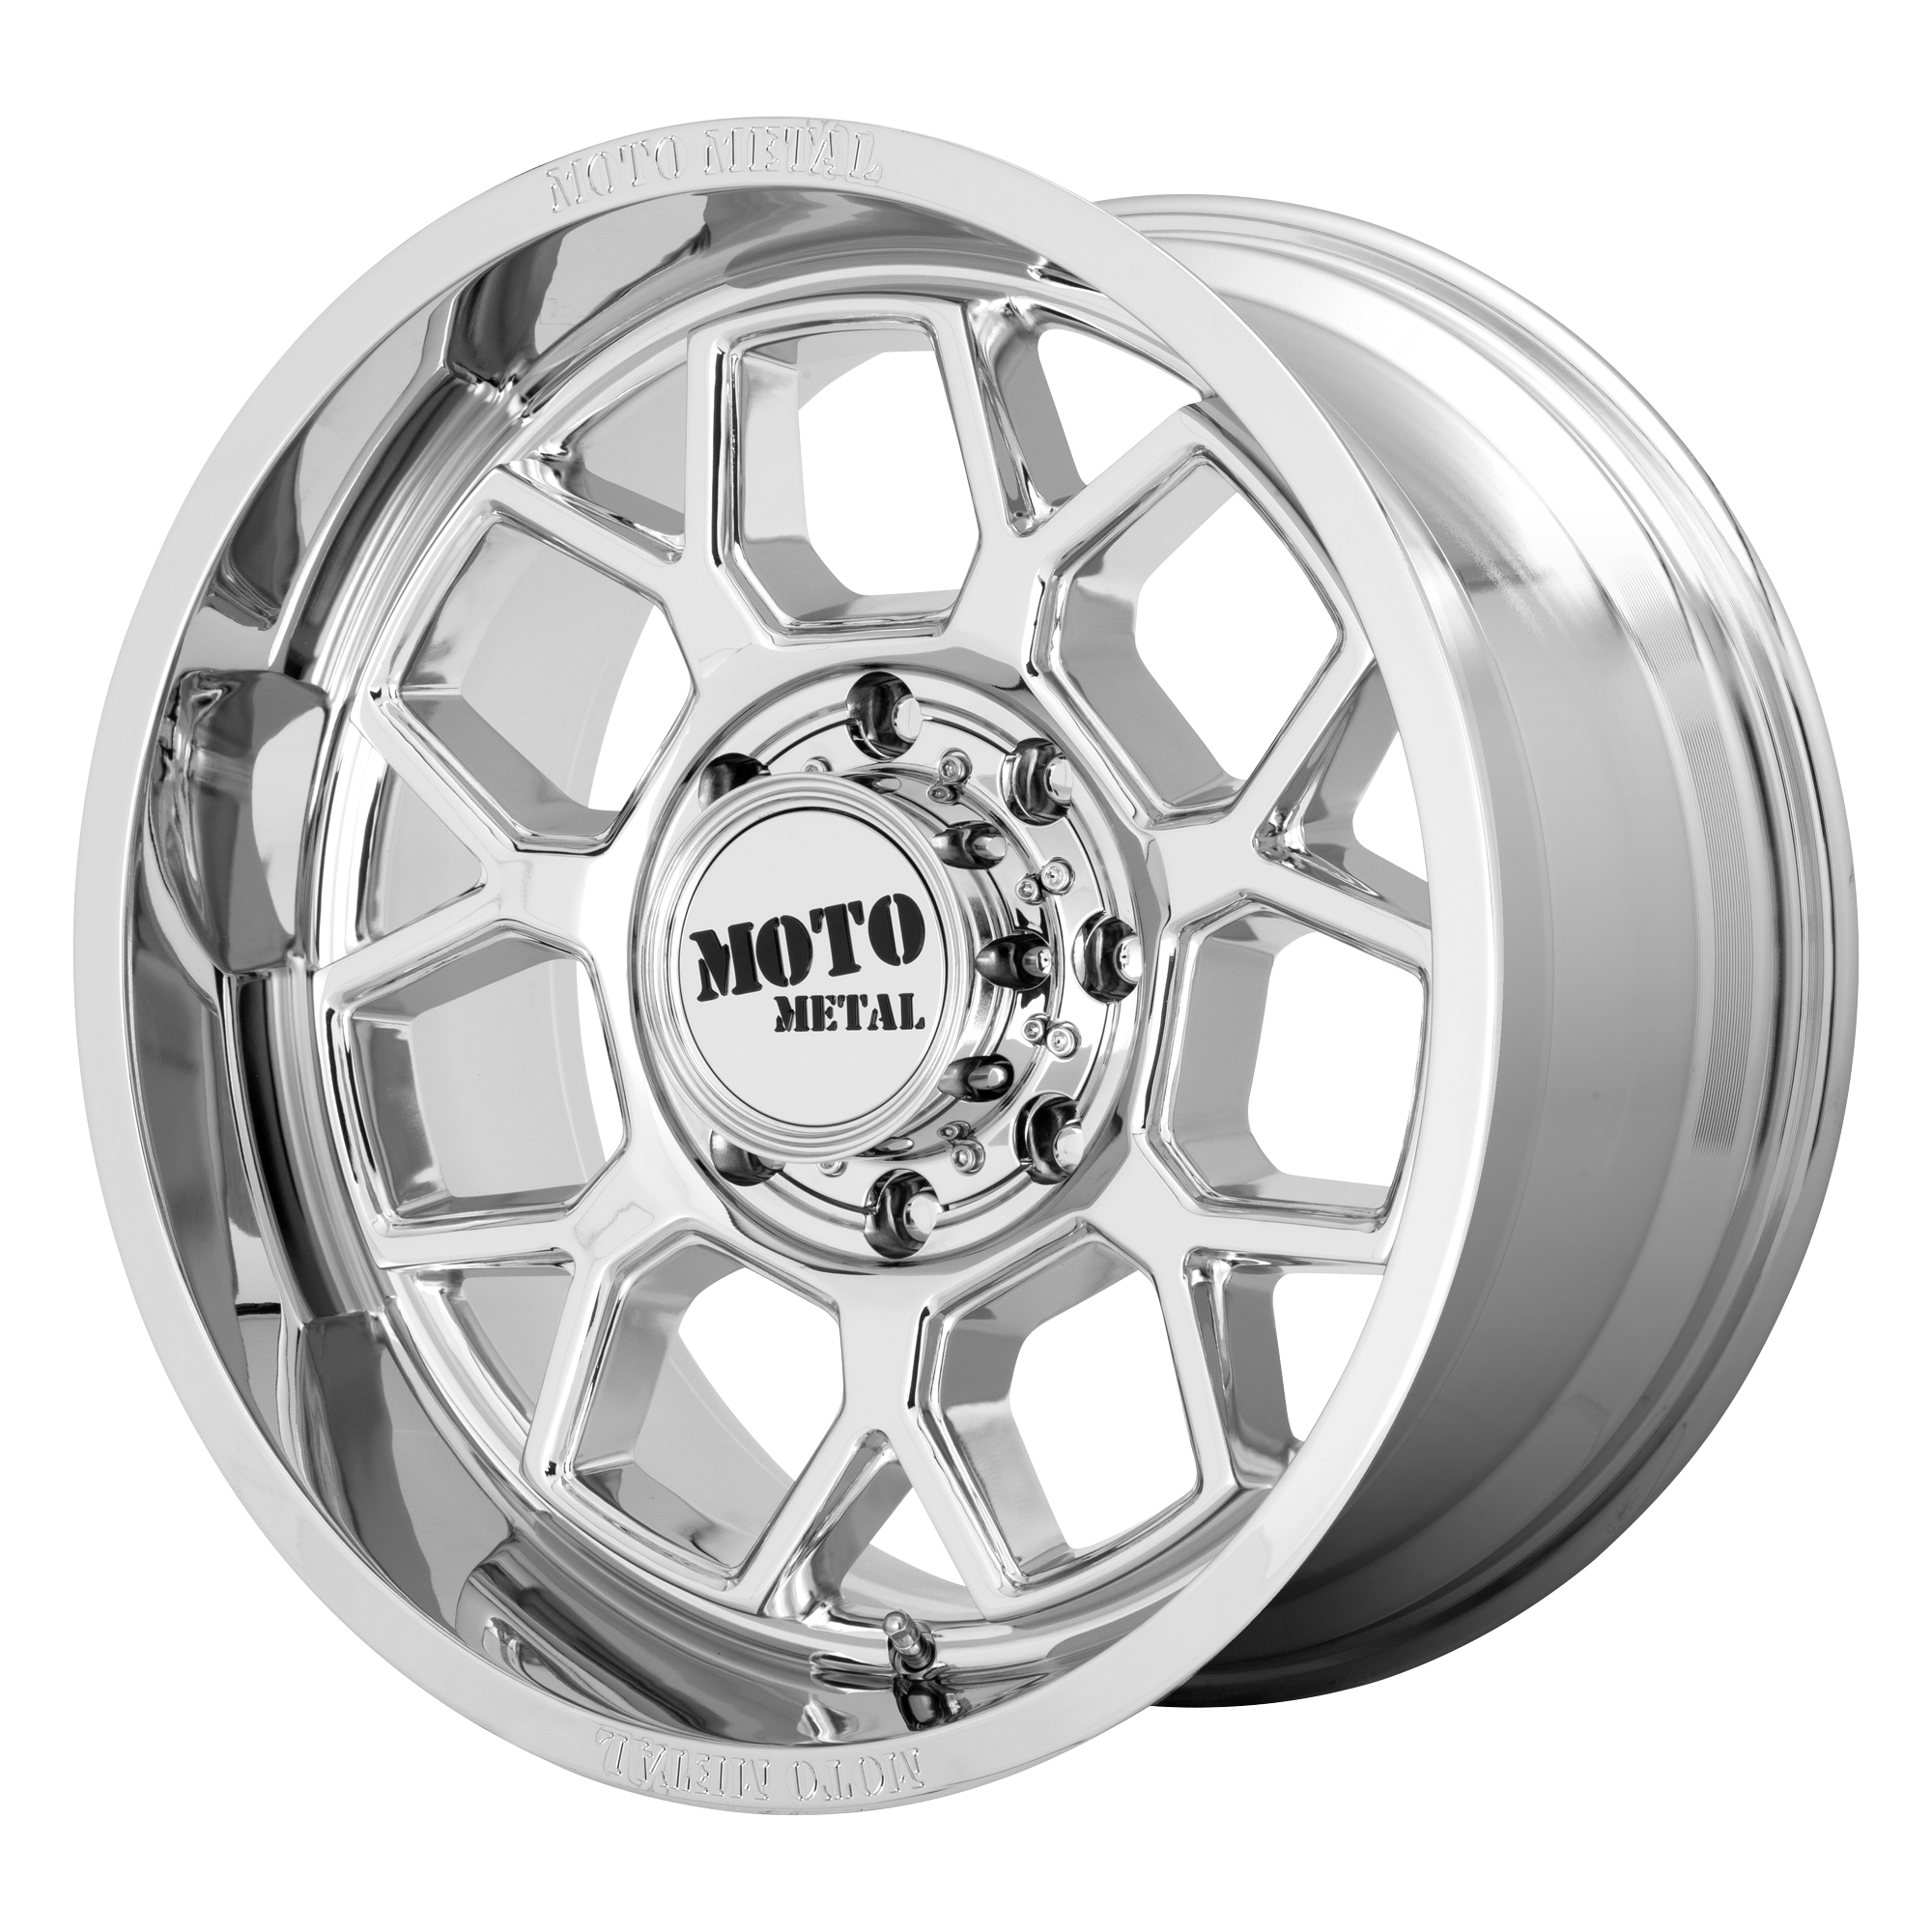 BANSHEE 20x10 8x165.10 CHROME (-18 mm) - Tires and Engine Performance